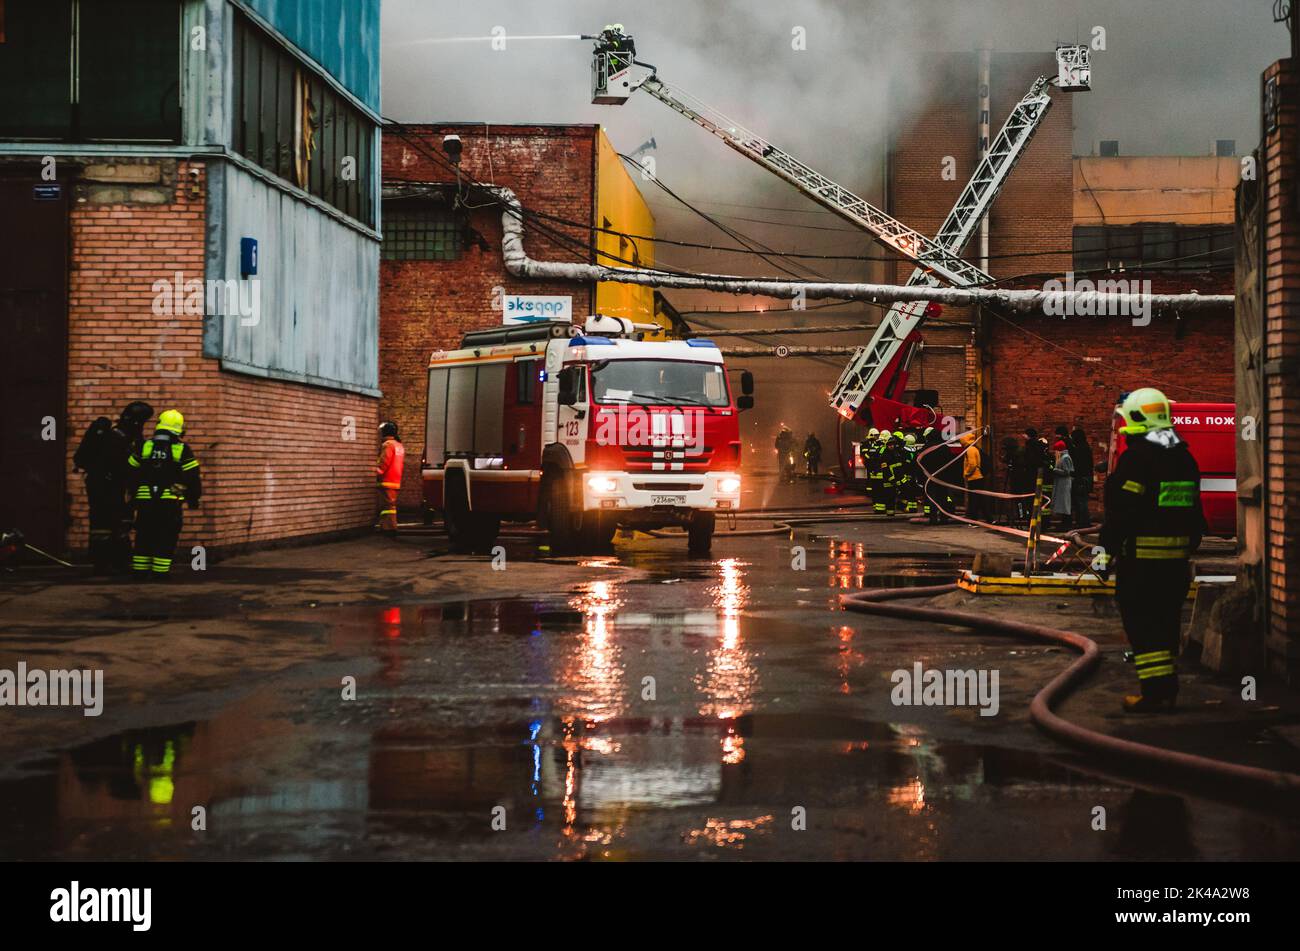 December 13, 2019, Moscow, Russia. A fire brigade extinguishes a fire in an industrial quarter. Stock Photo